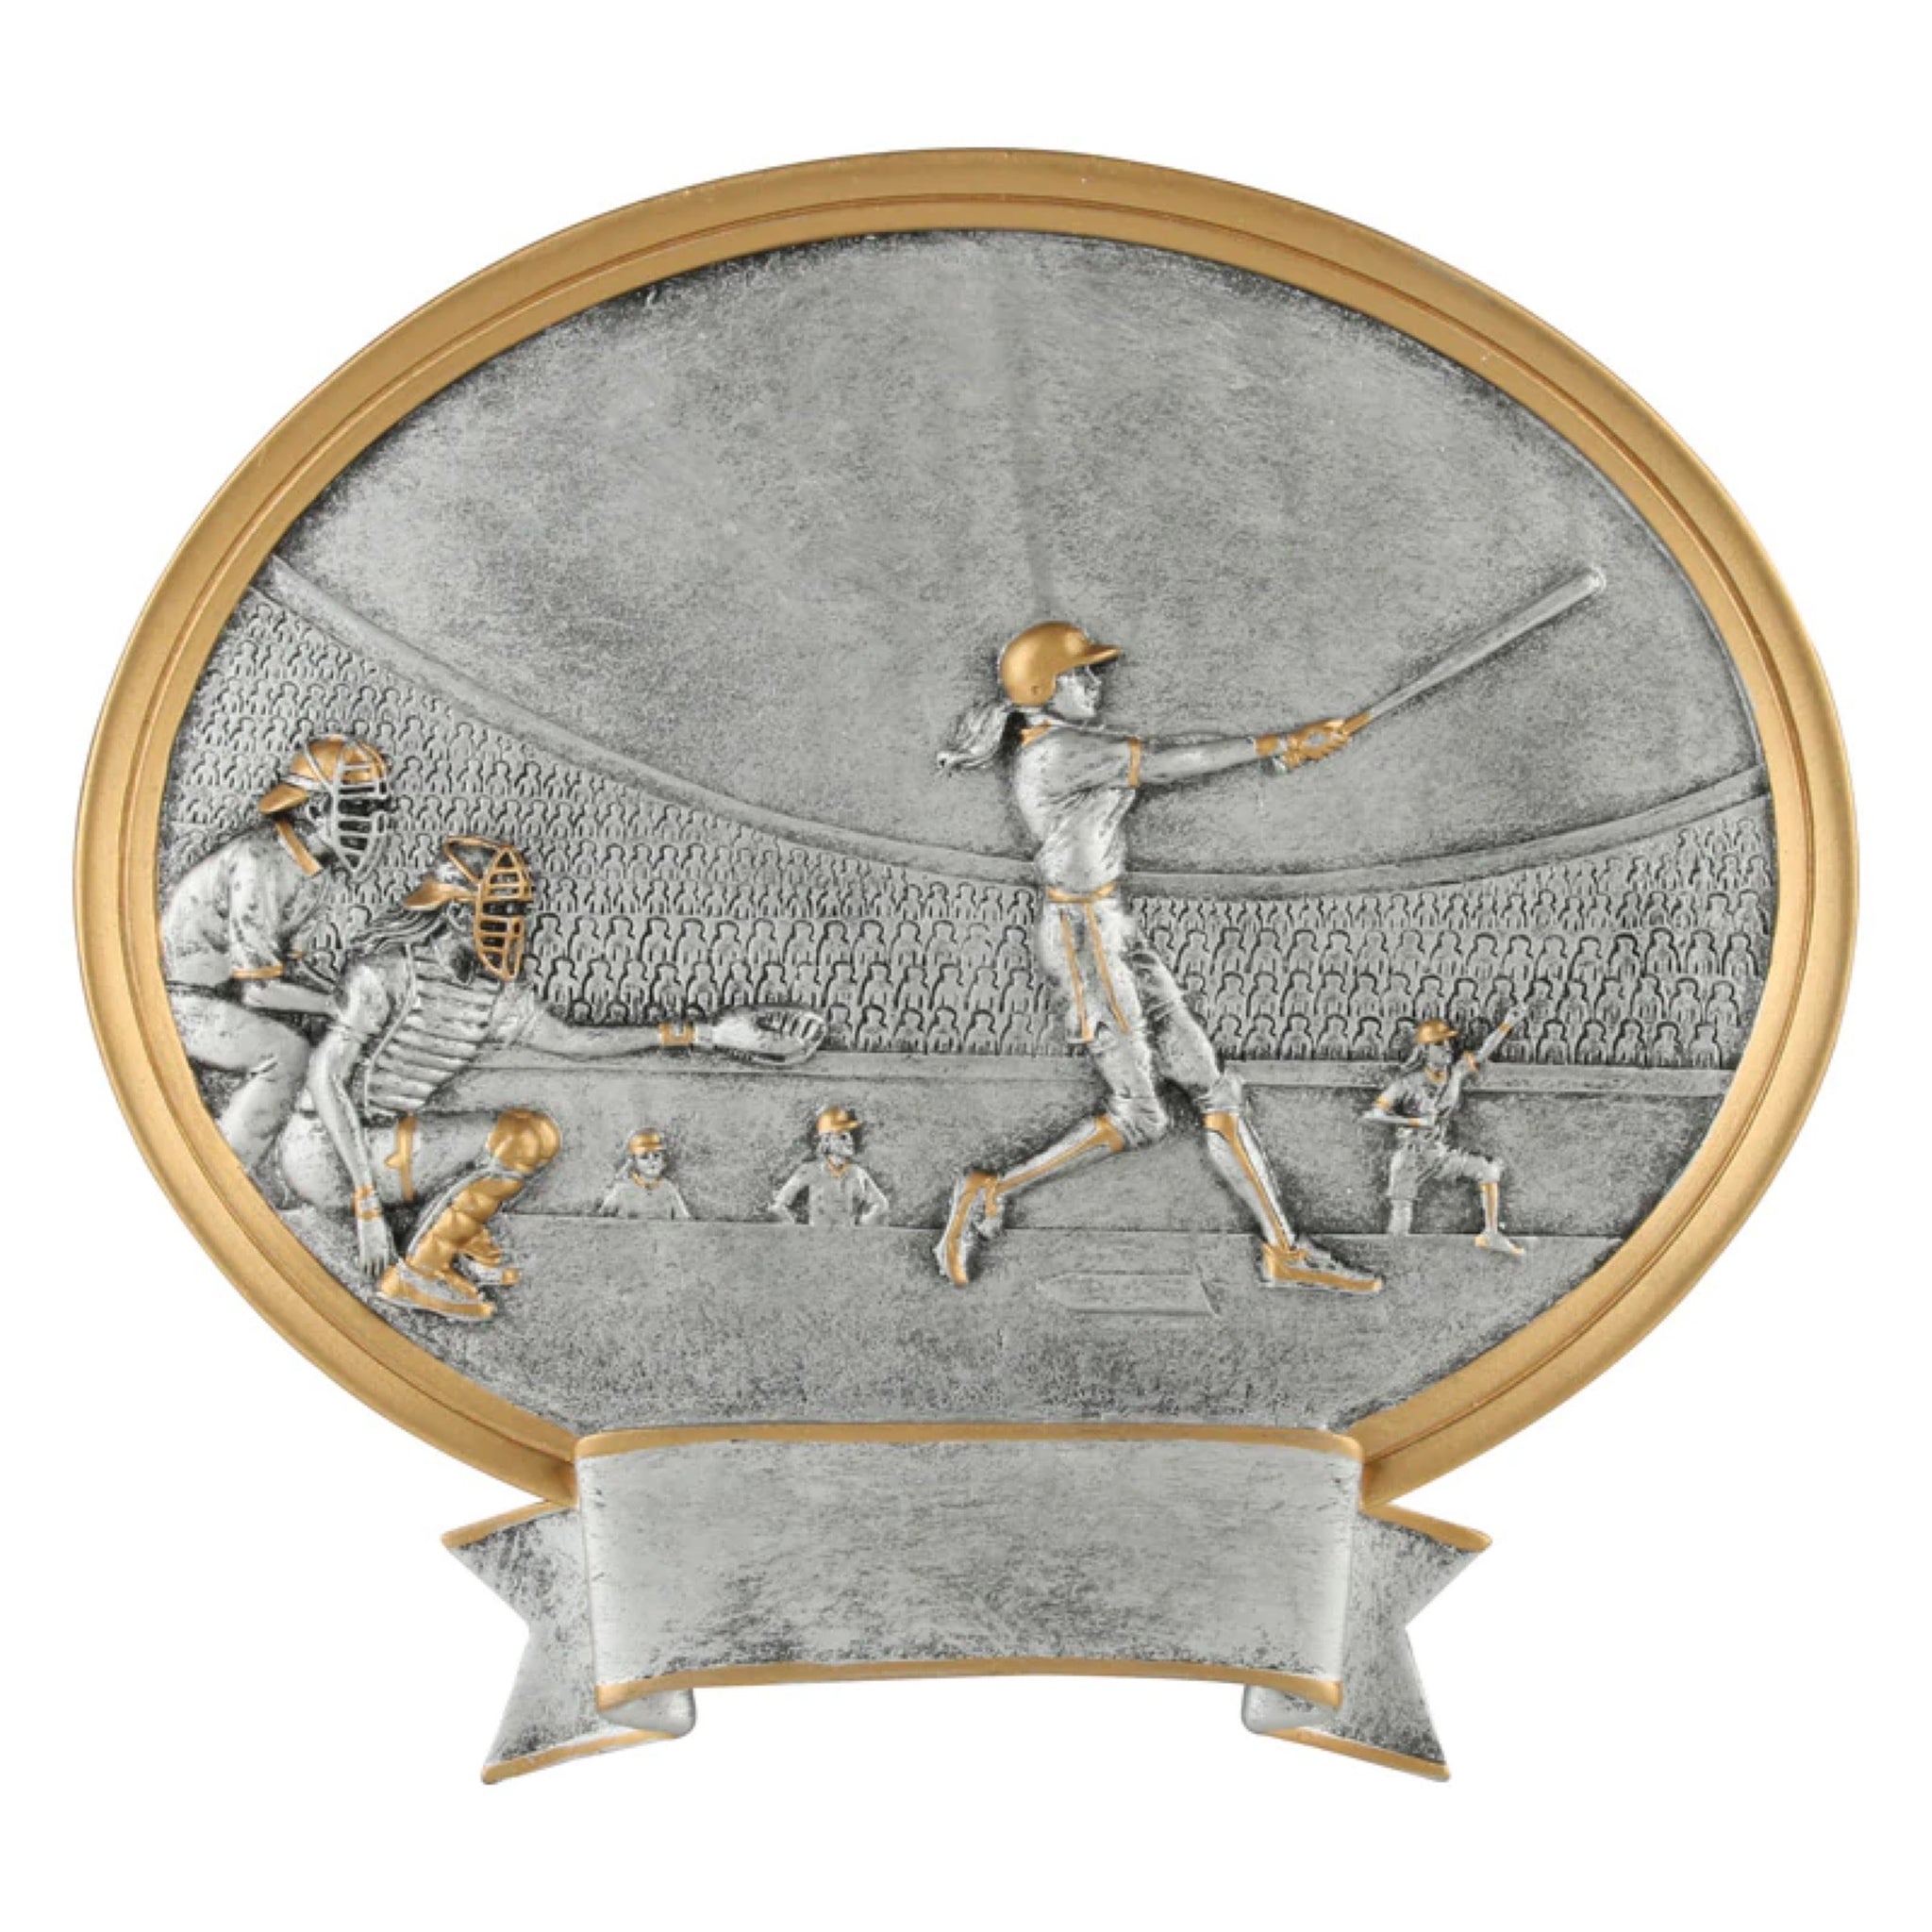 Gold & Silver Softball Resin / Softball Action Plays Trophy